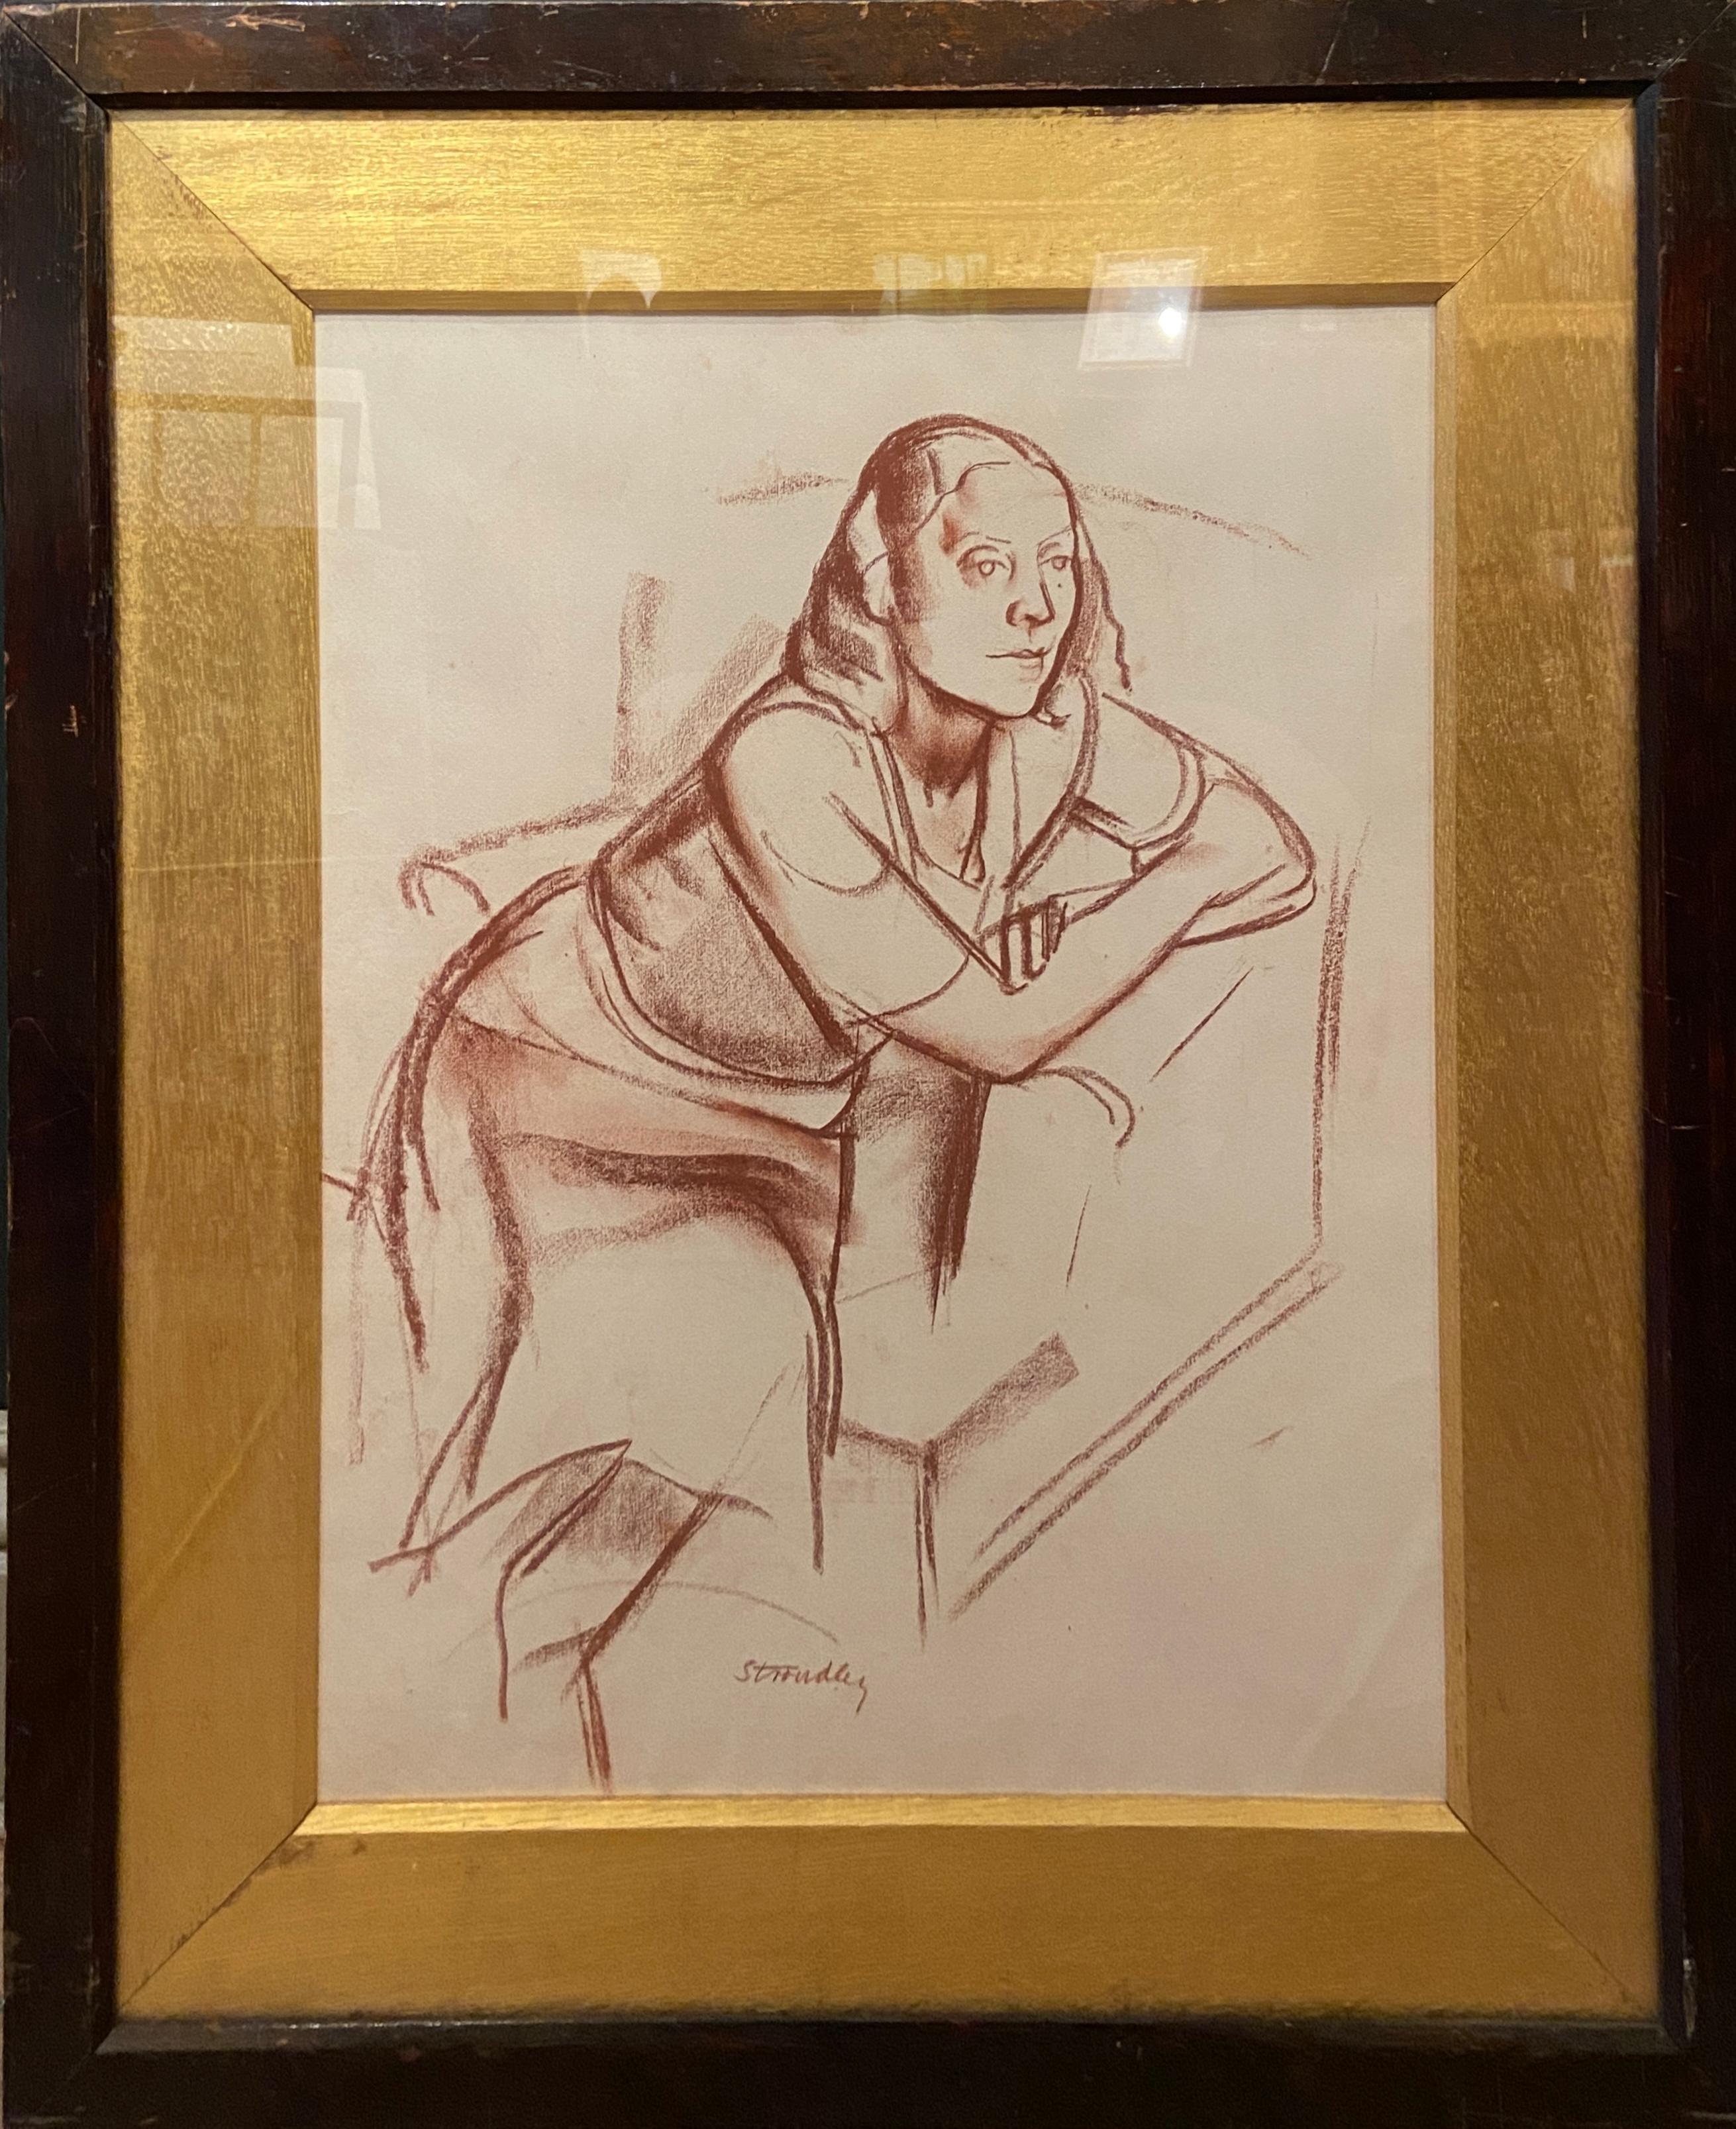 Woman at Rest, Signed Charcoal Sketch, 20th Century British - Art by James Stroudley